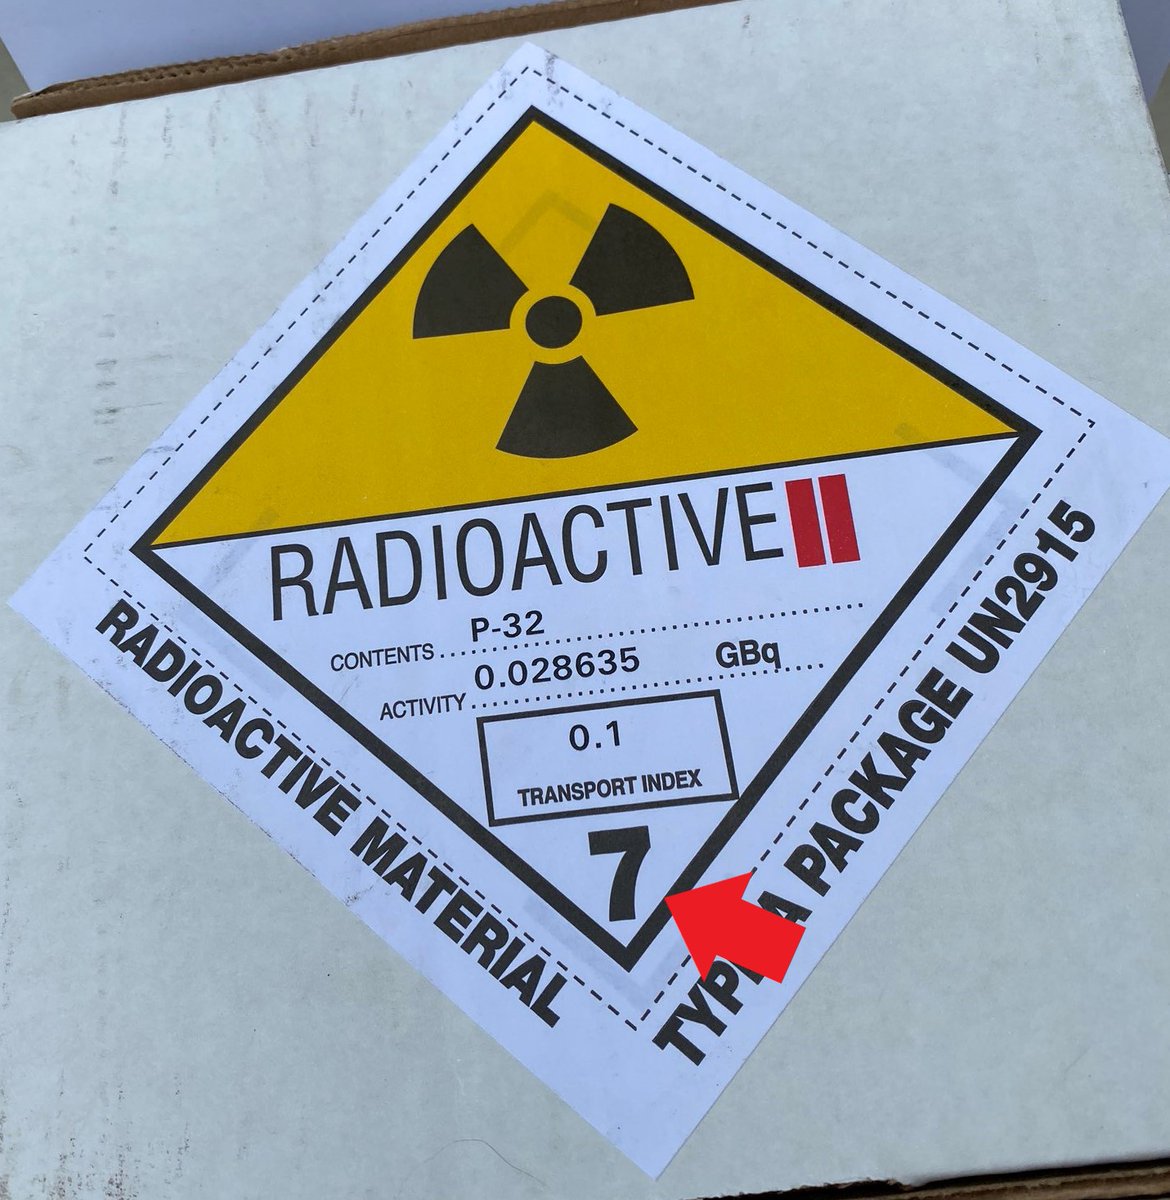 I have been asked if I could please explain what this label in some detail. [cracks knuckles] Okay, lets start with the number at the bottom. In the DOT hazardous materials communication system, 7 denotes materials where the PRIMARY hazard is radioactivity.